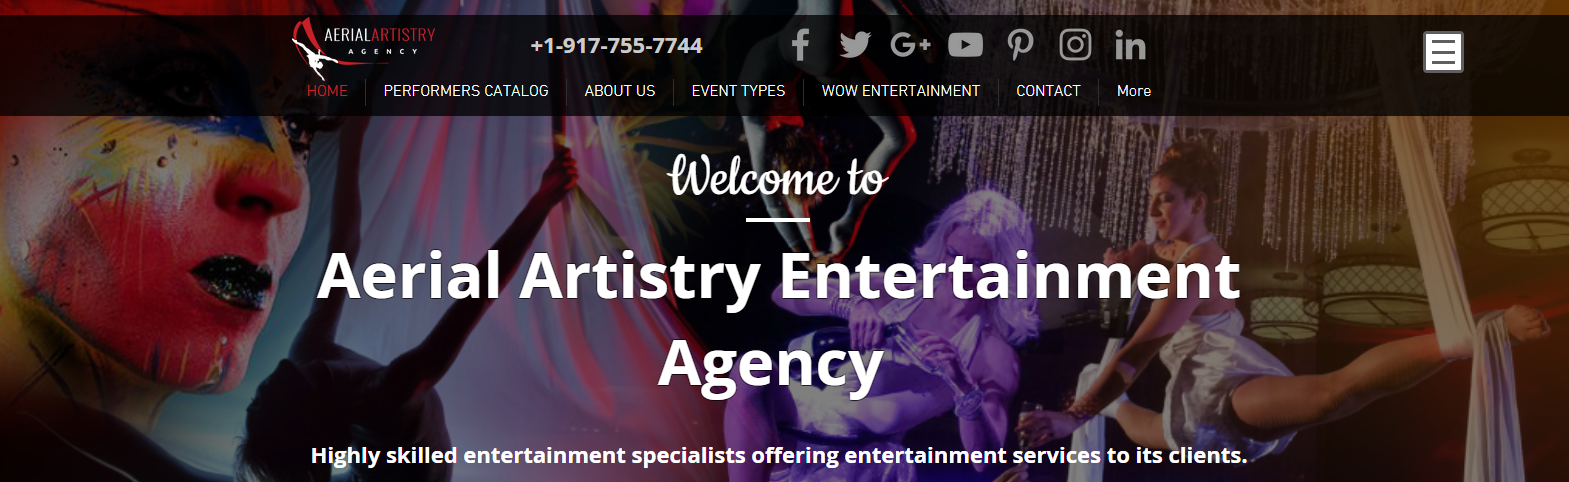 Corporate Entertainment Agency for Events